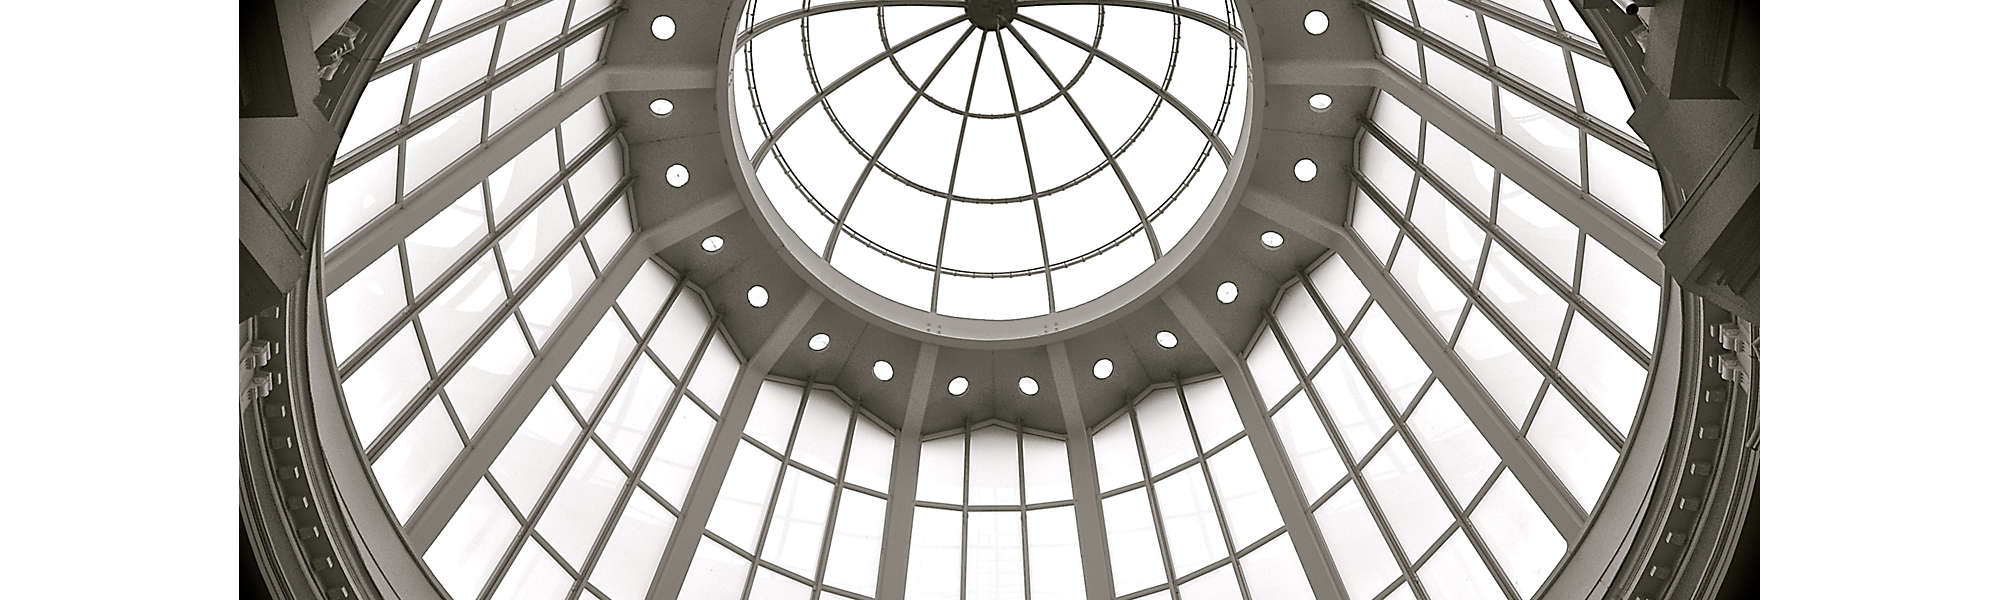 Domed glass roof